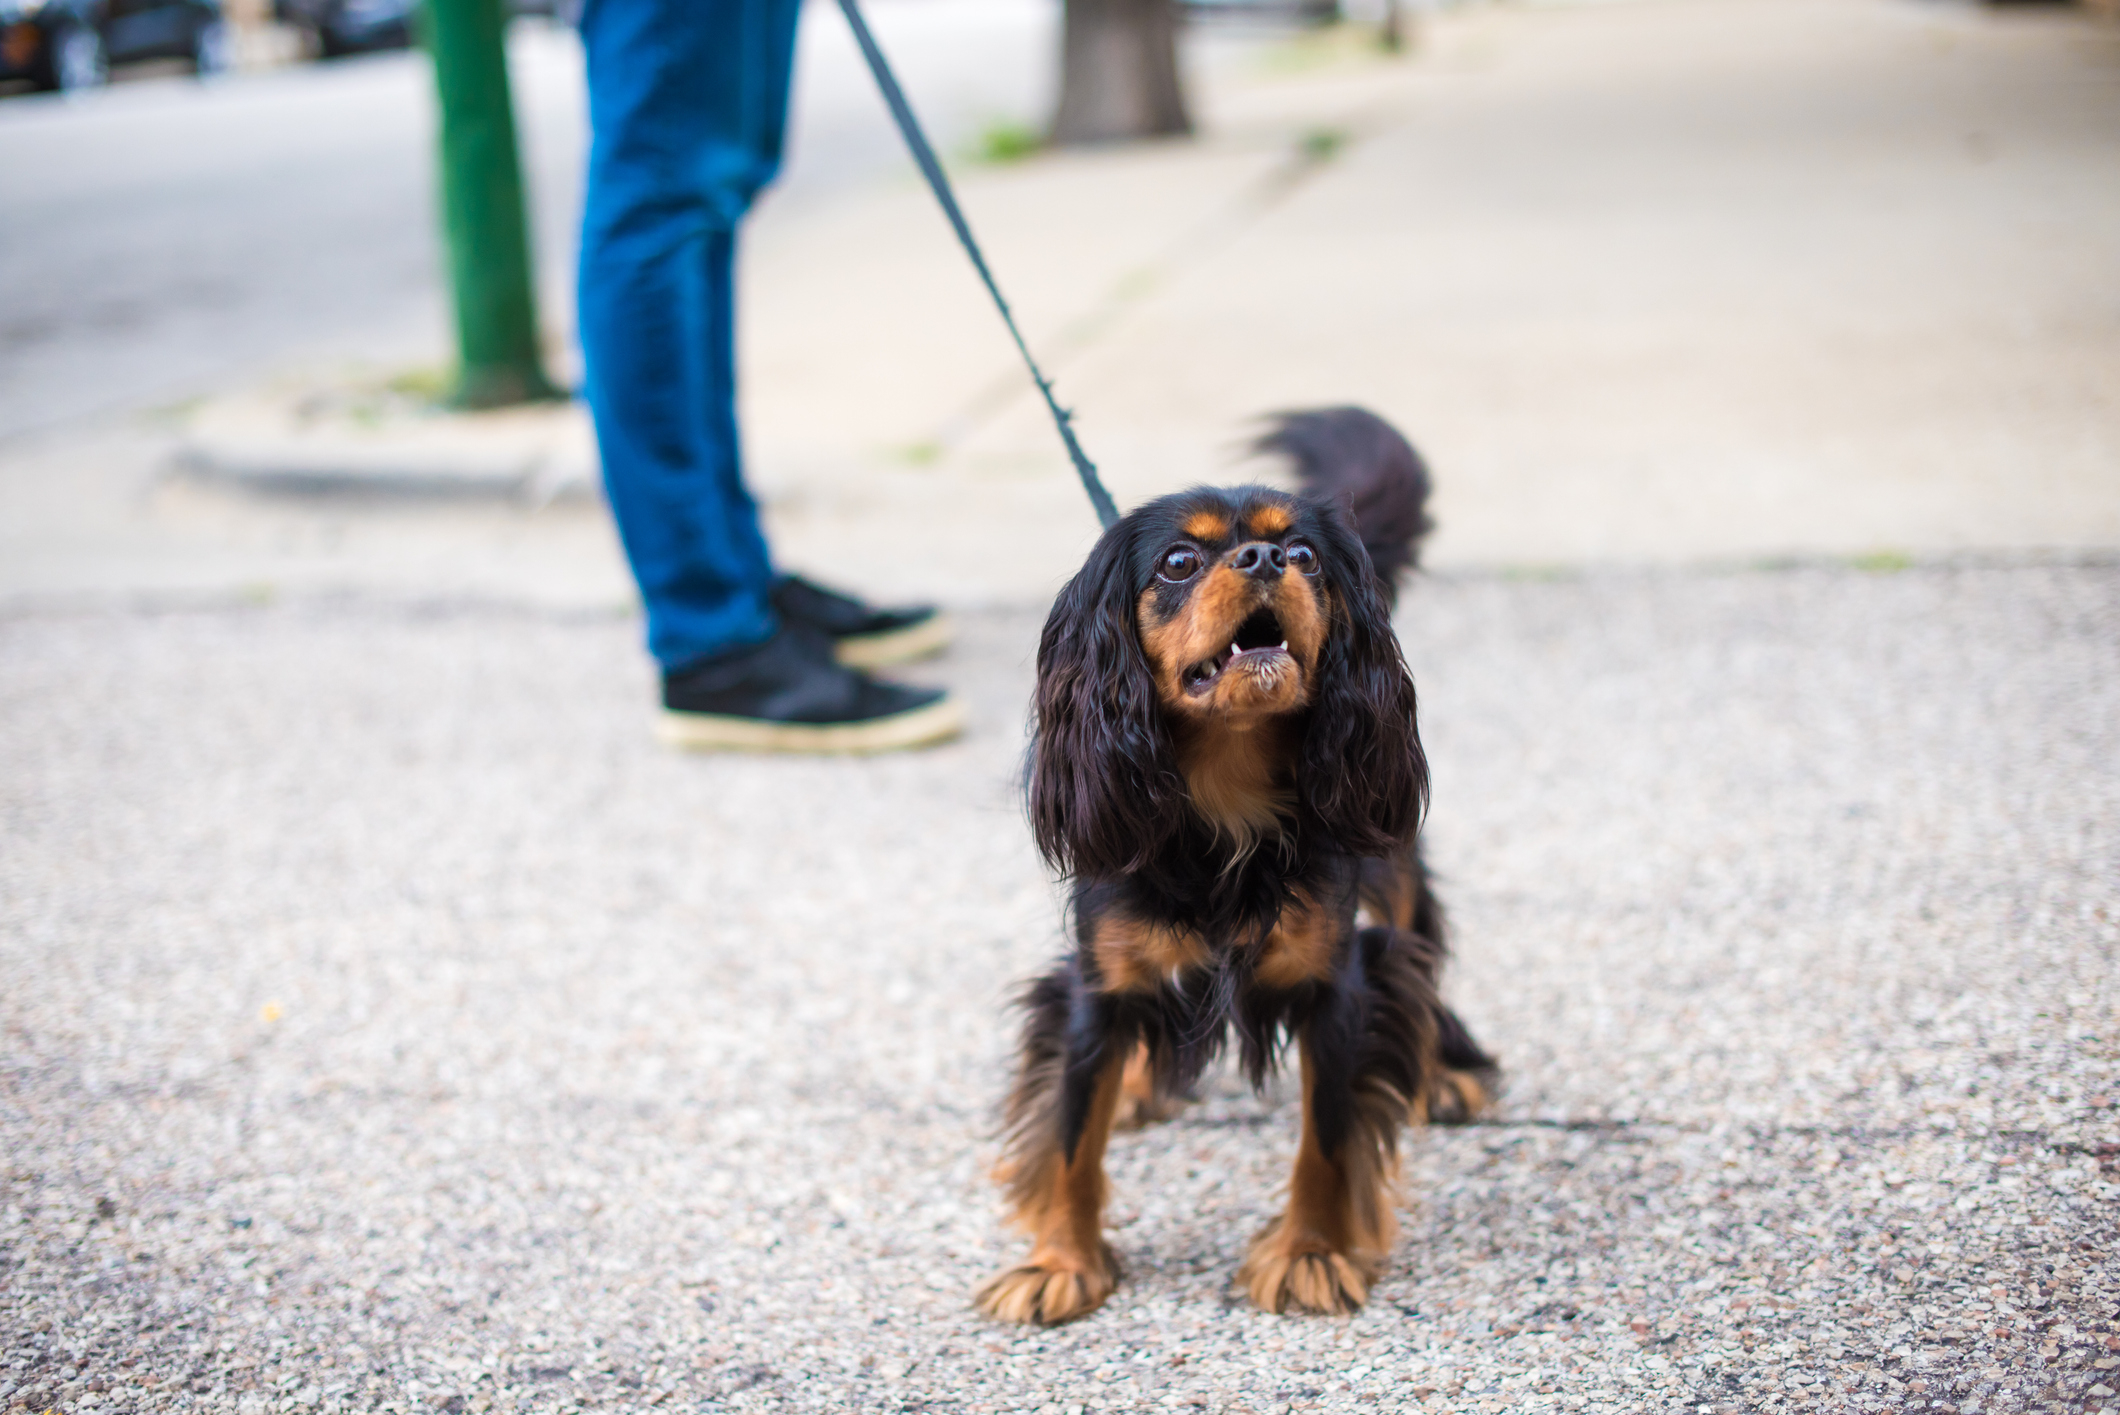 Cavalier King Charles Spaniel out for a walk and barking